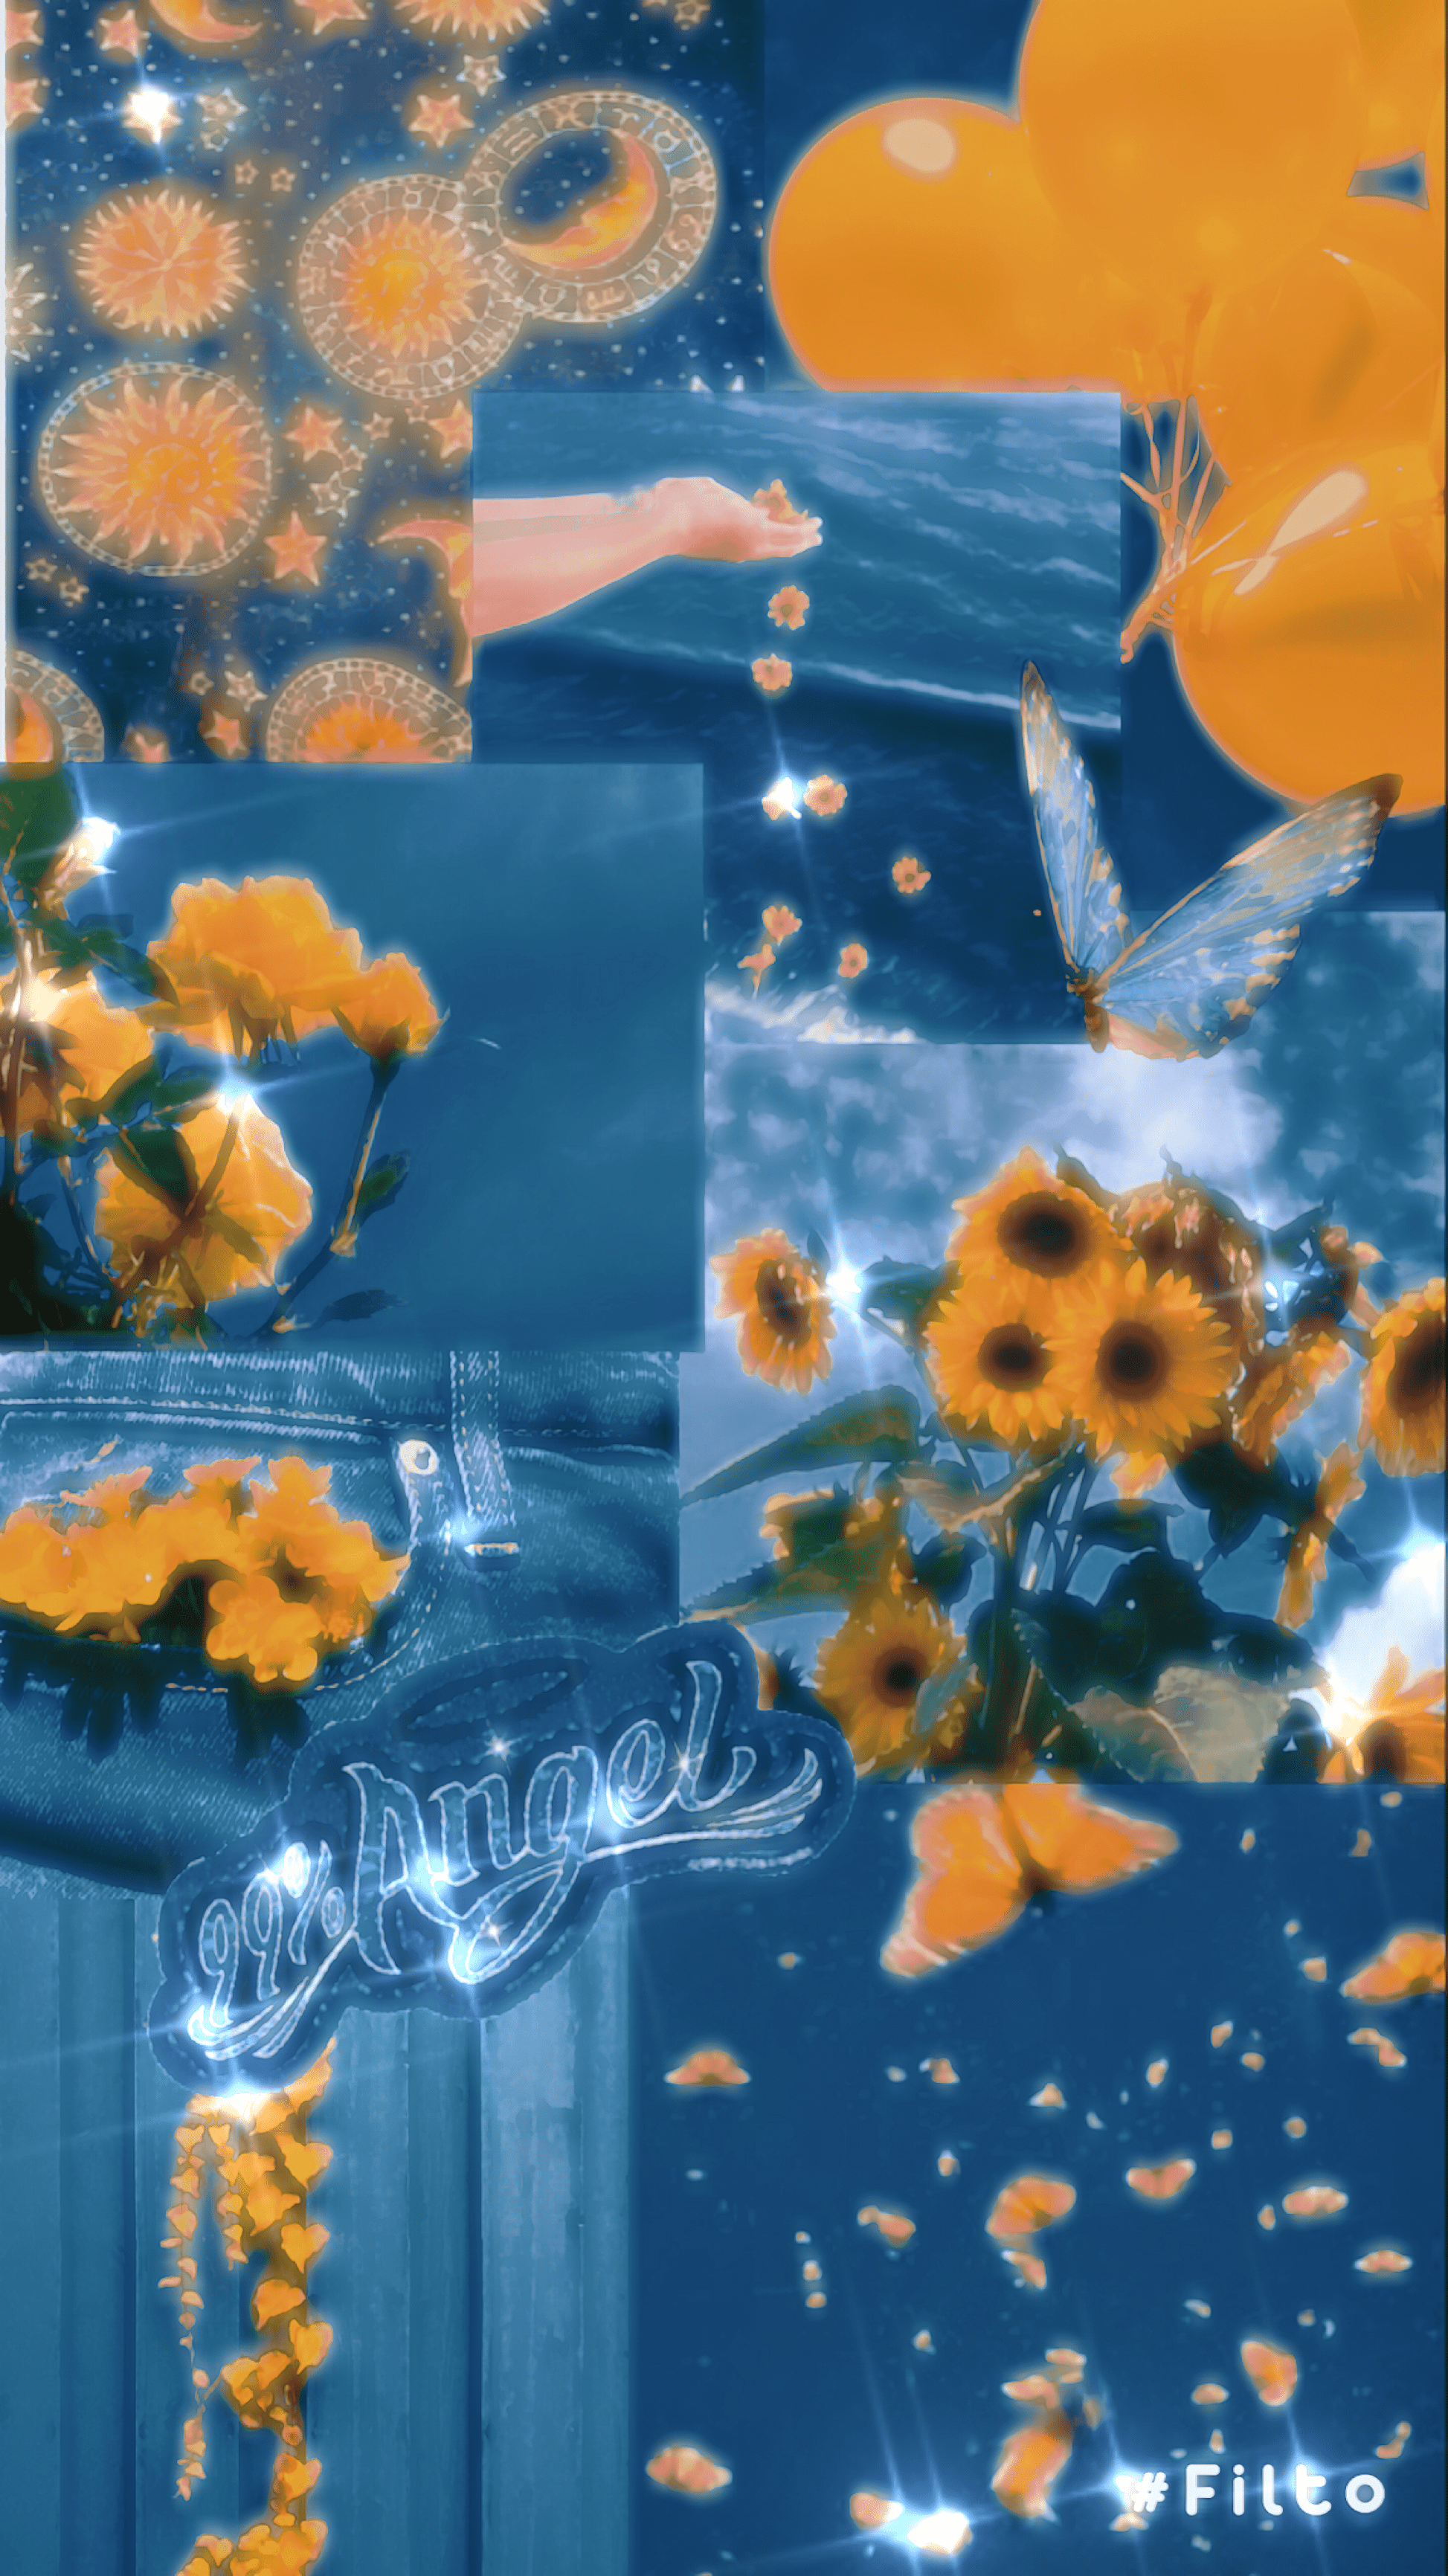 A collage of blue and yellow aesthetic pictures including sunflowers, butterflies, and the moon. - Bling